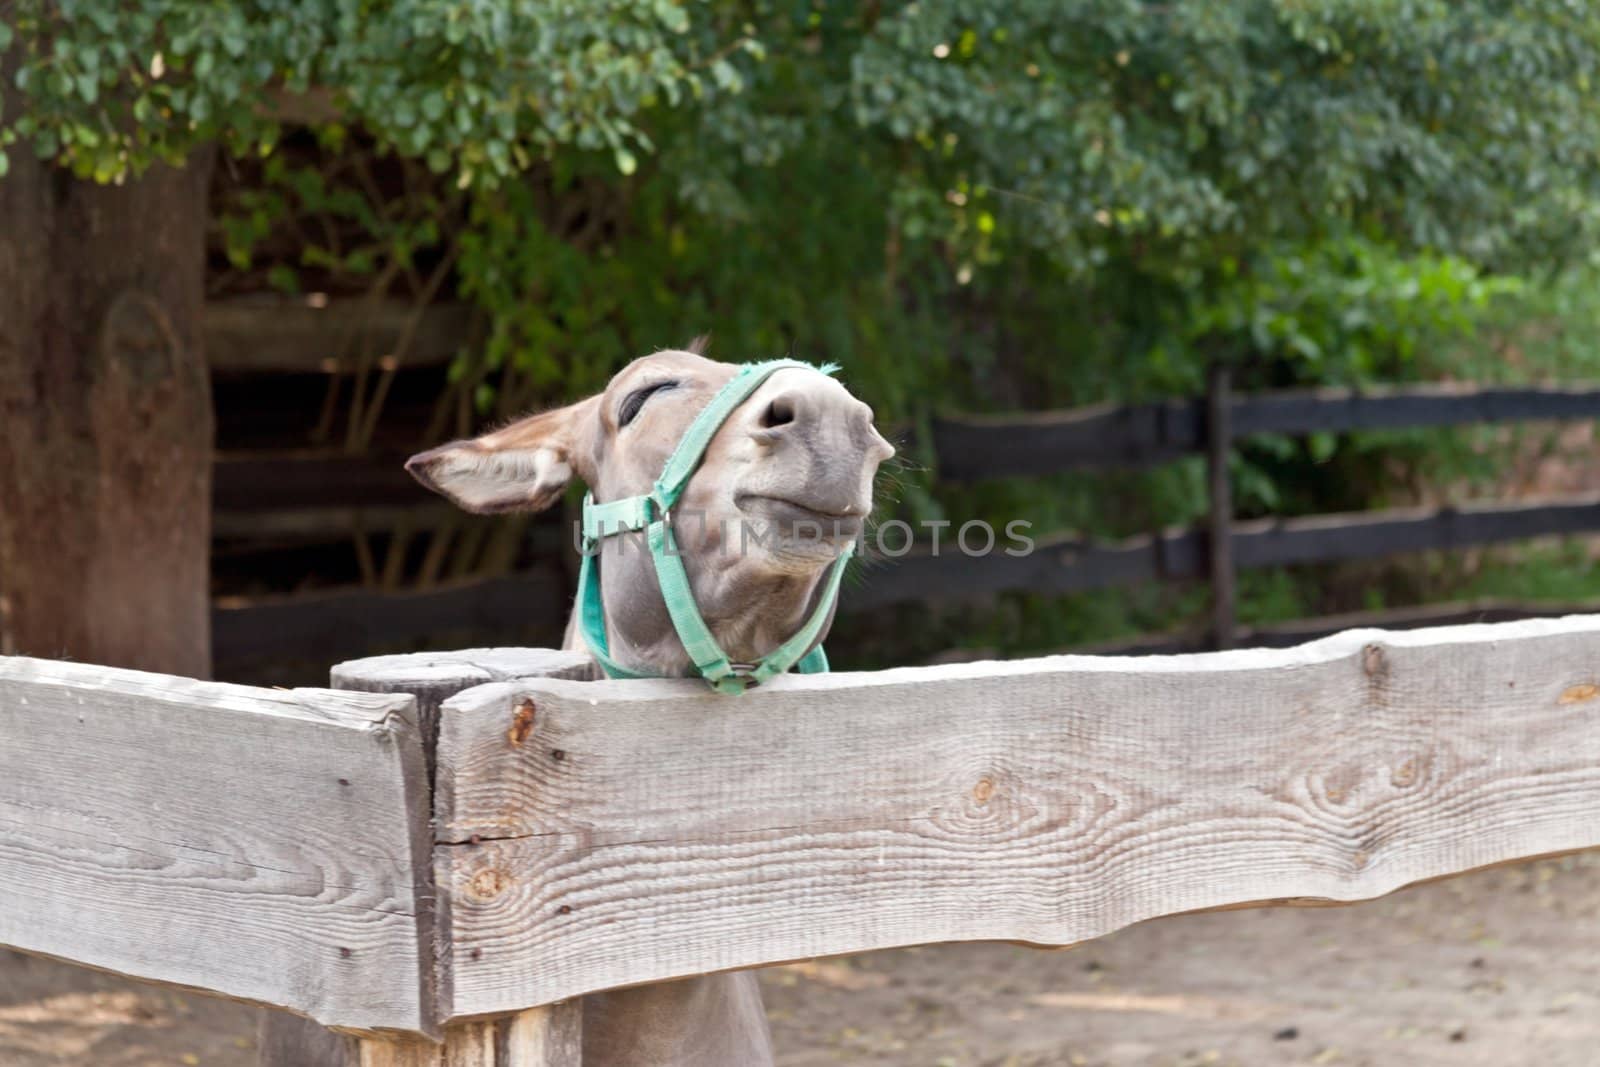 A single donkey in the wooden corral